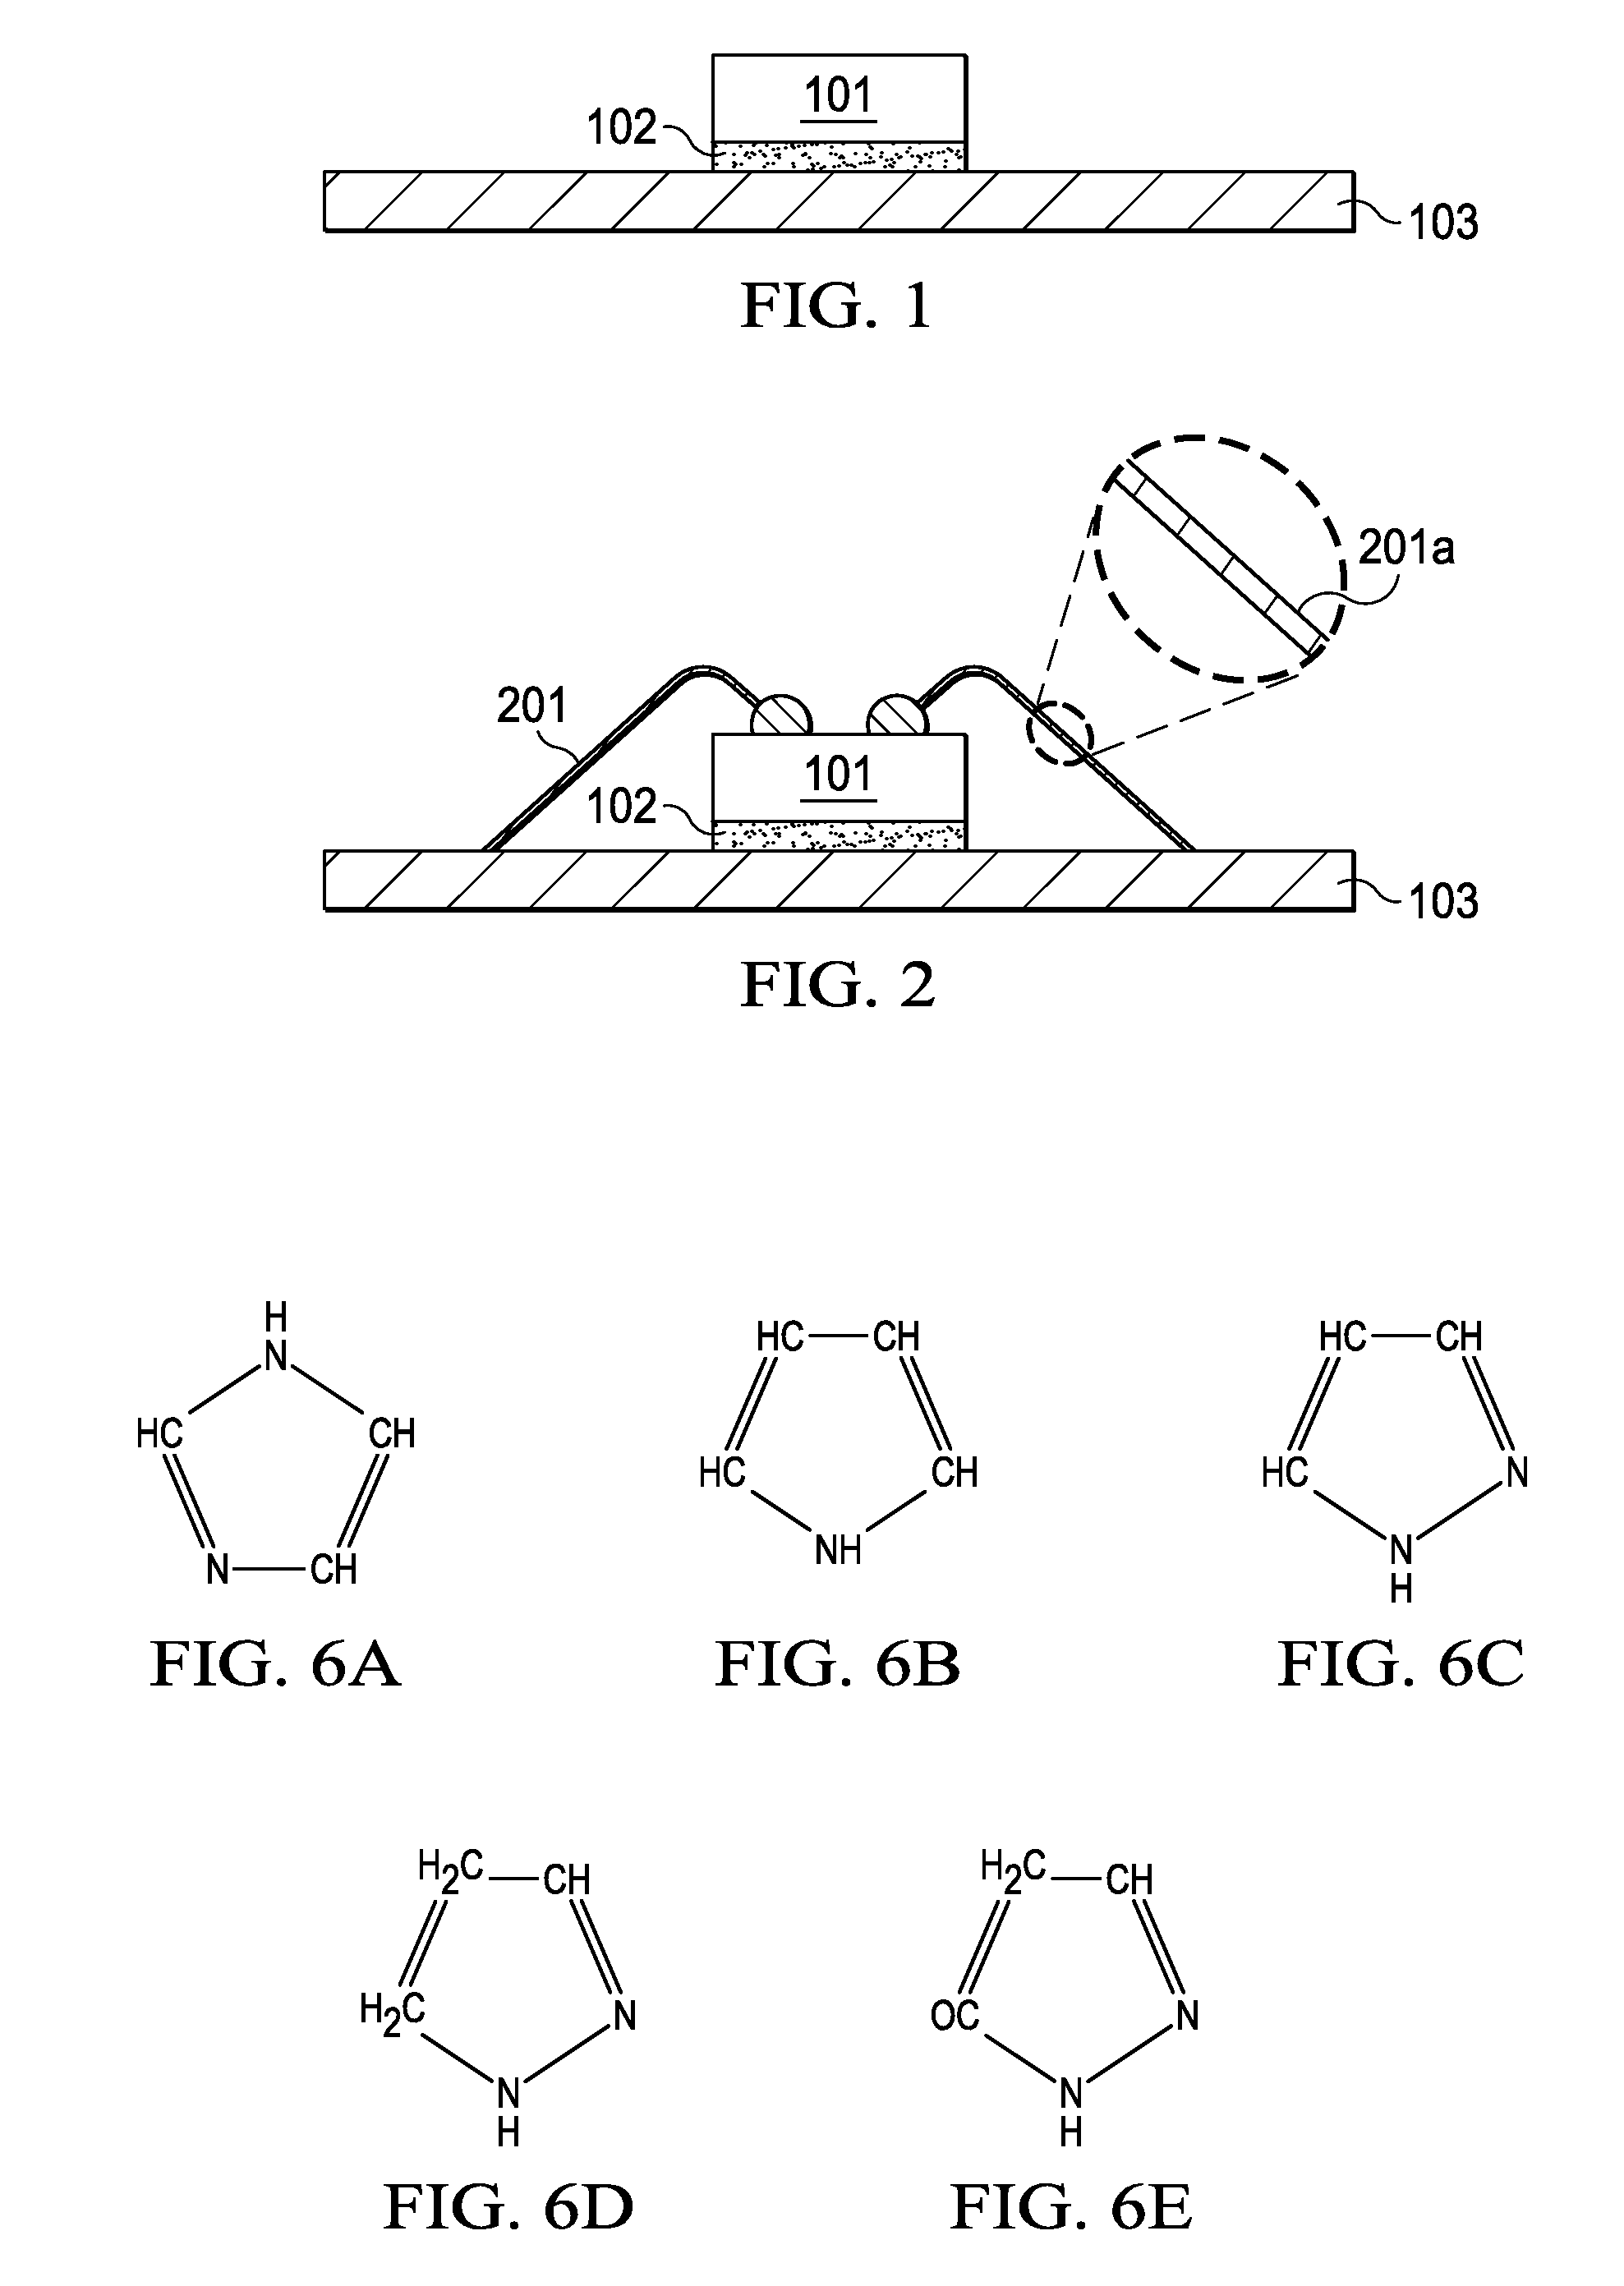 Packaging a semiconductor device having wires with polymerized insulator skin